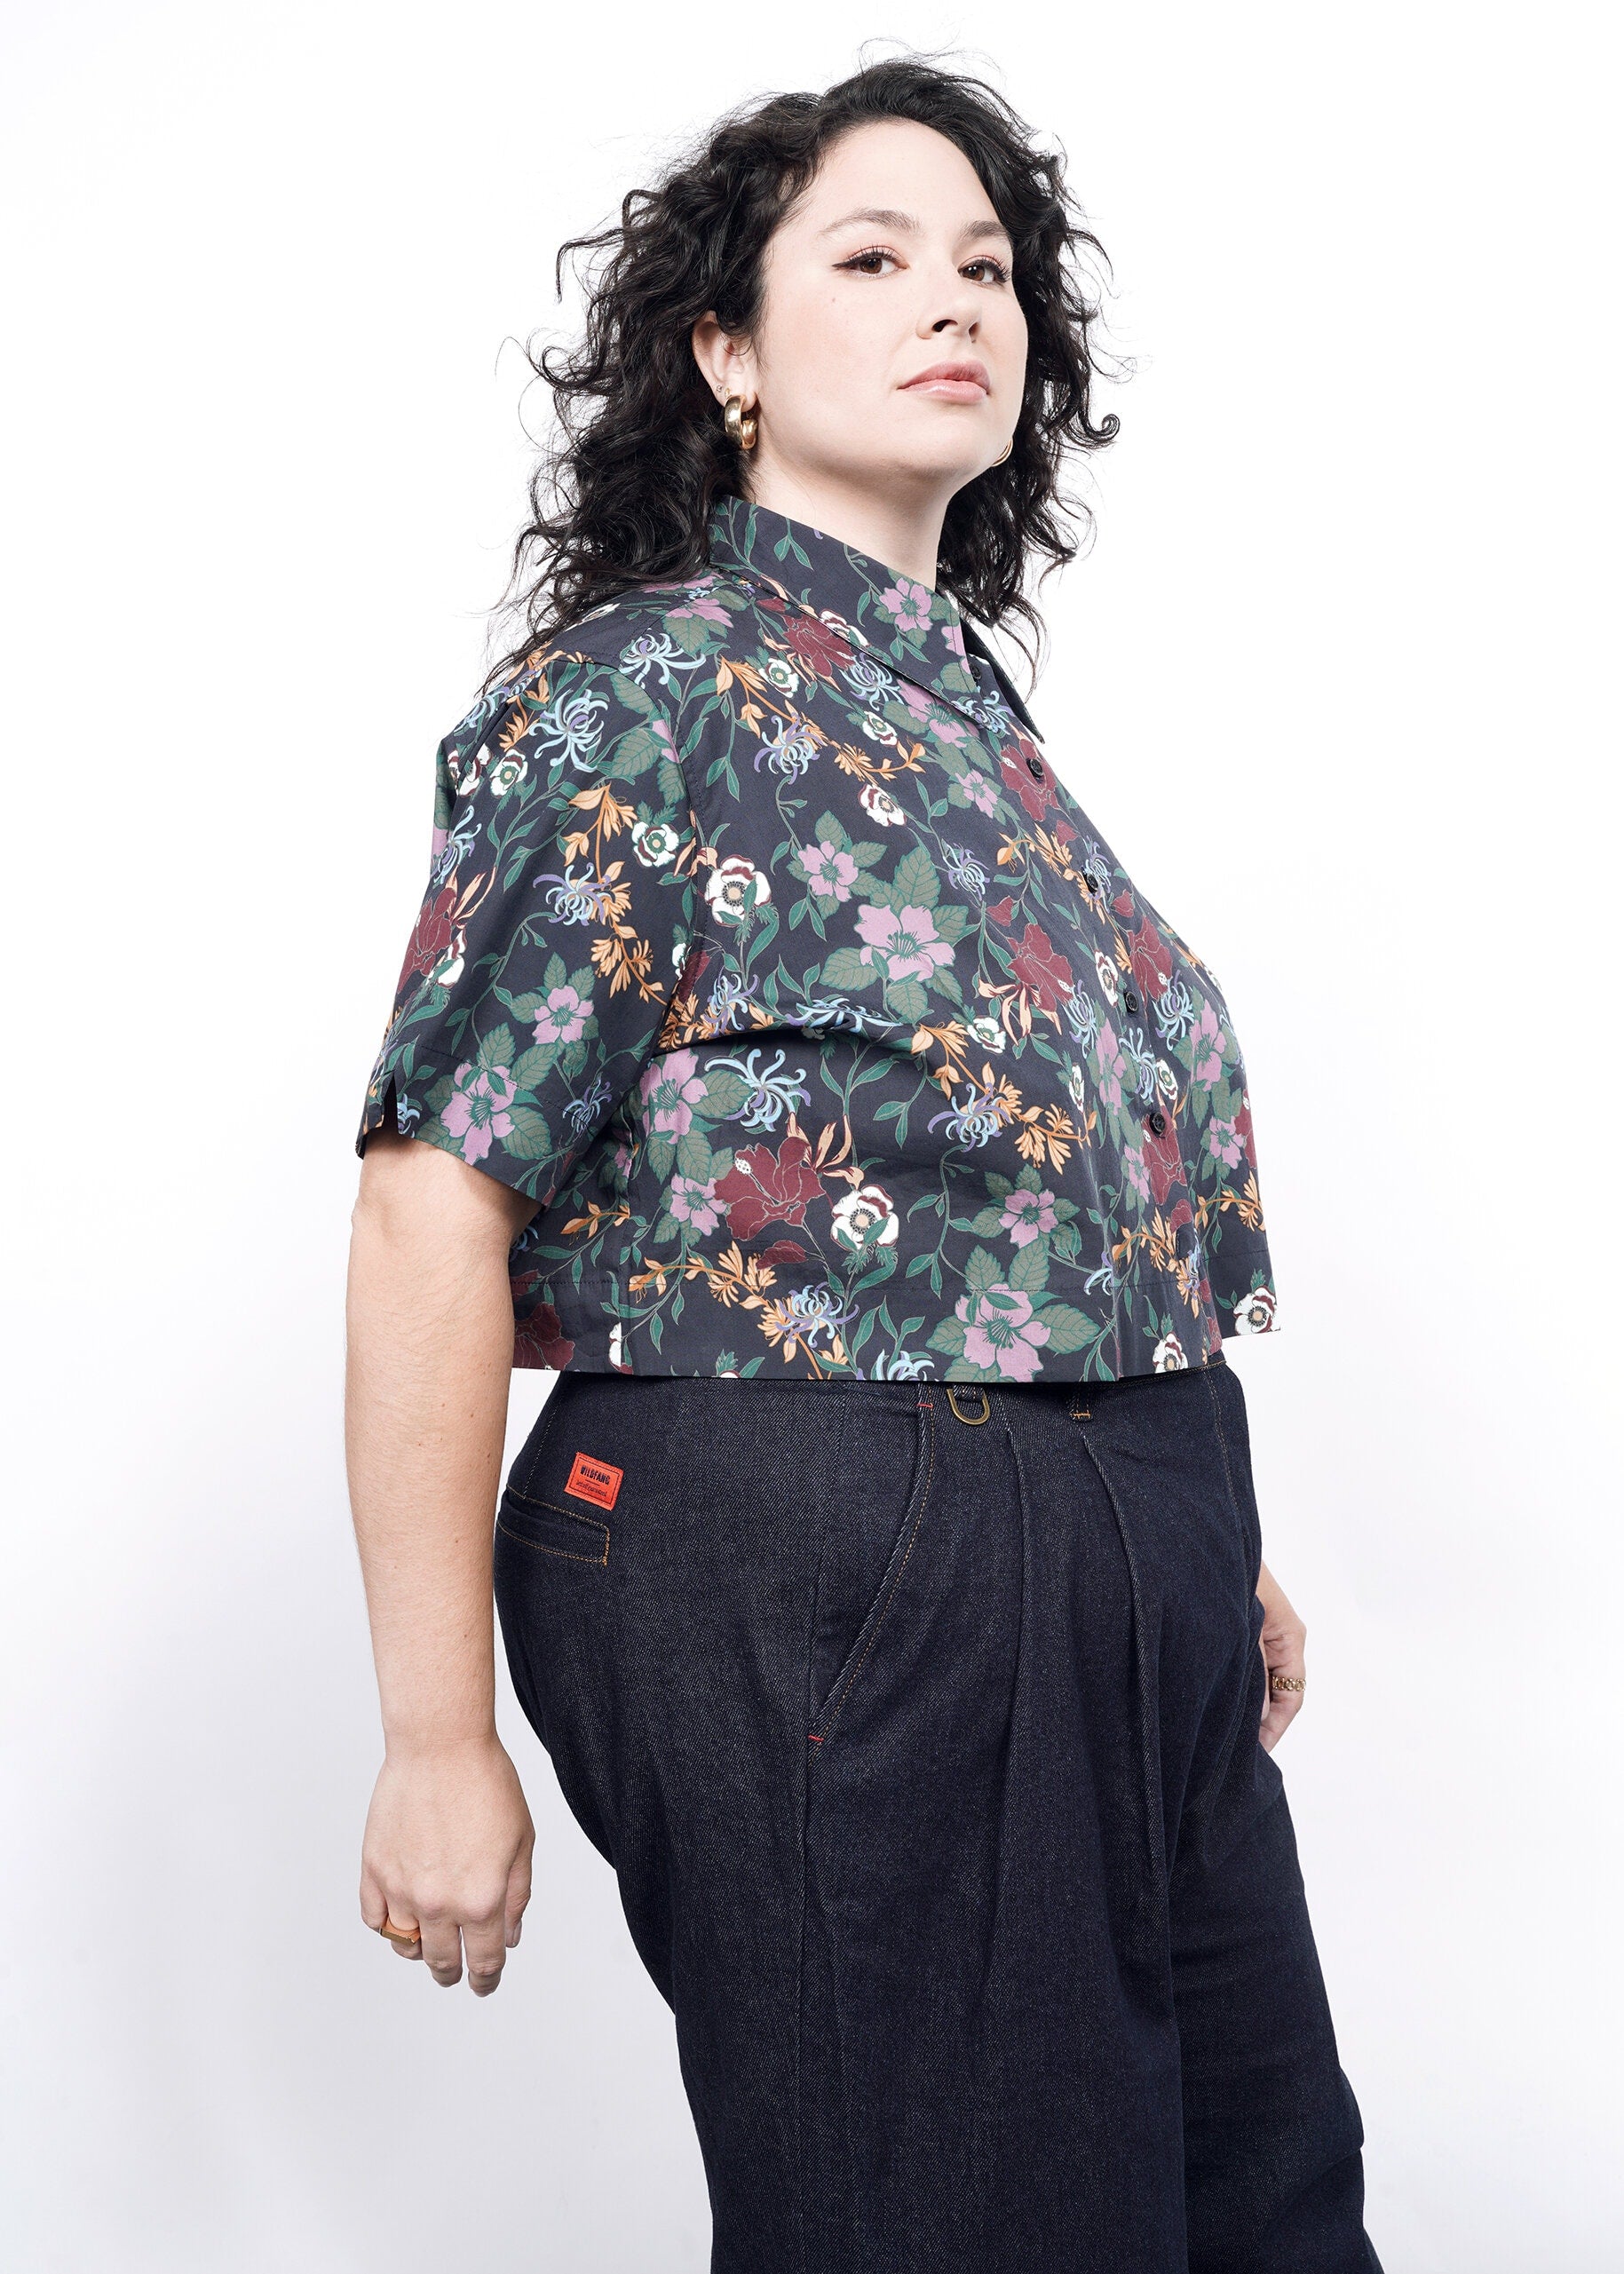 This button-down shirt is a plus-size fashion essential